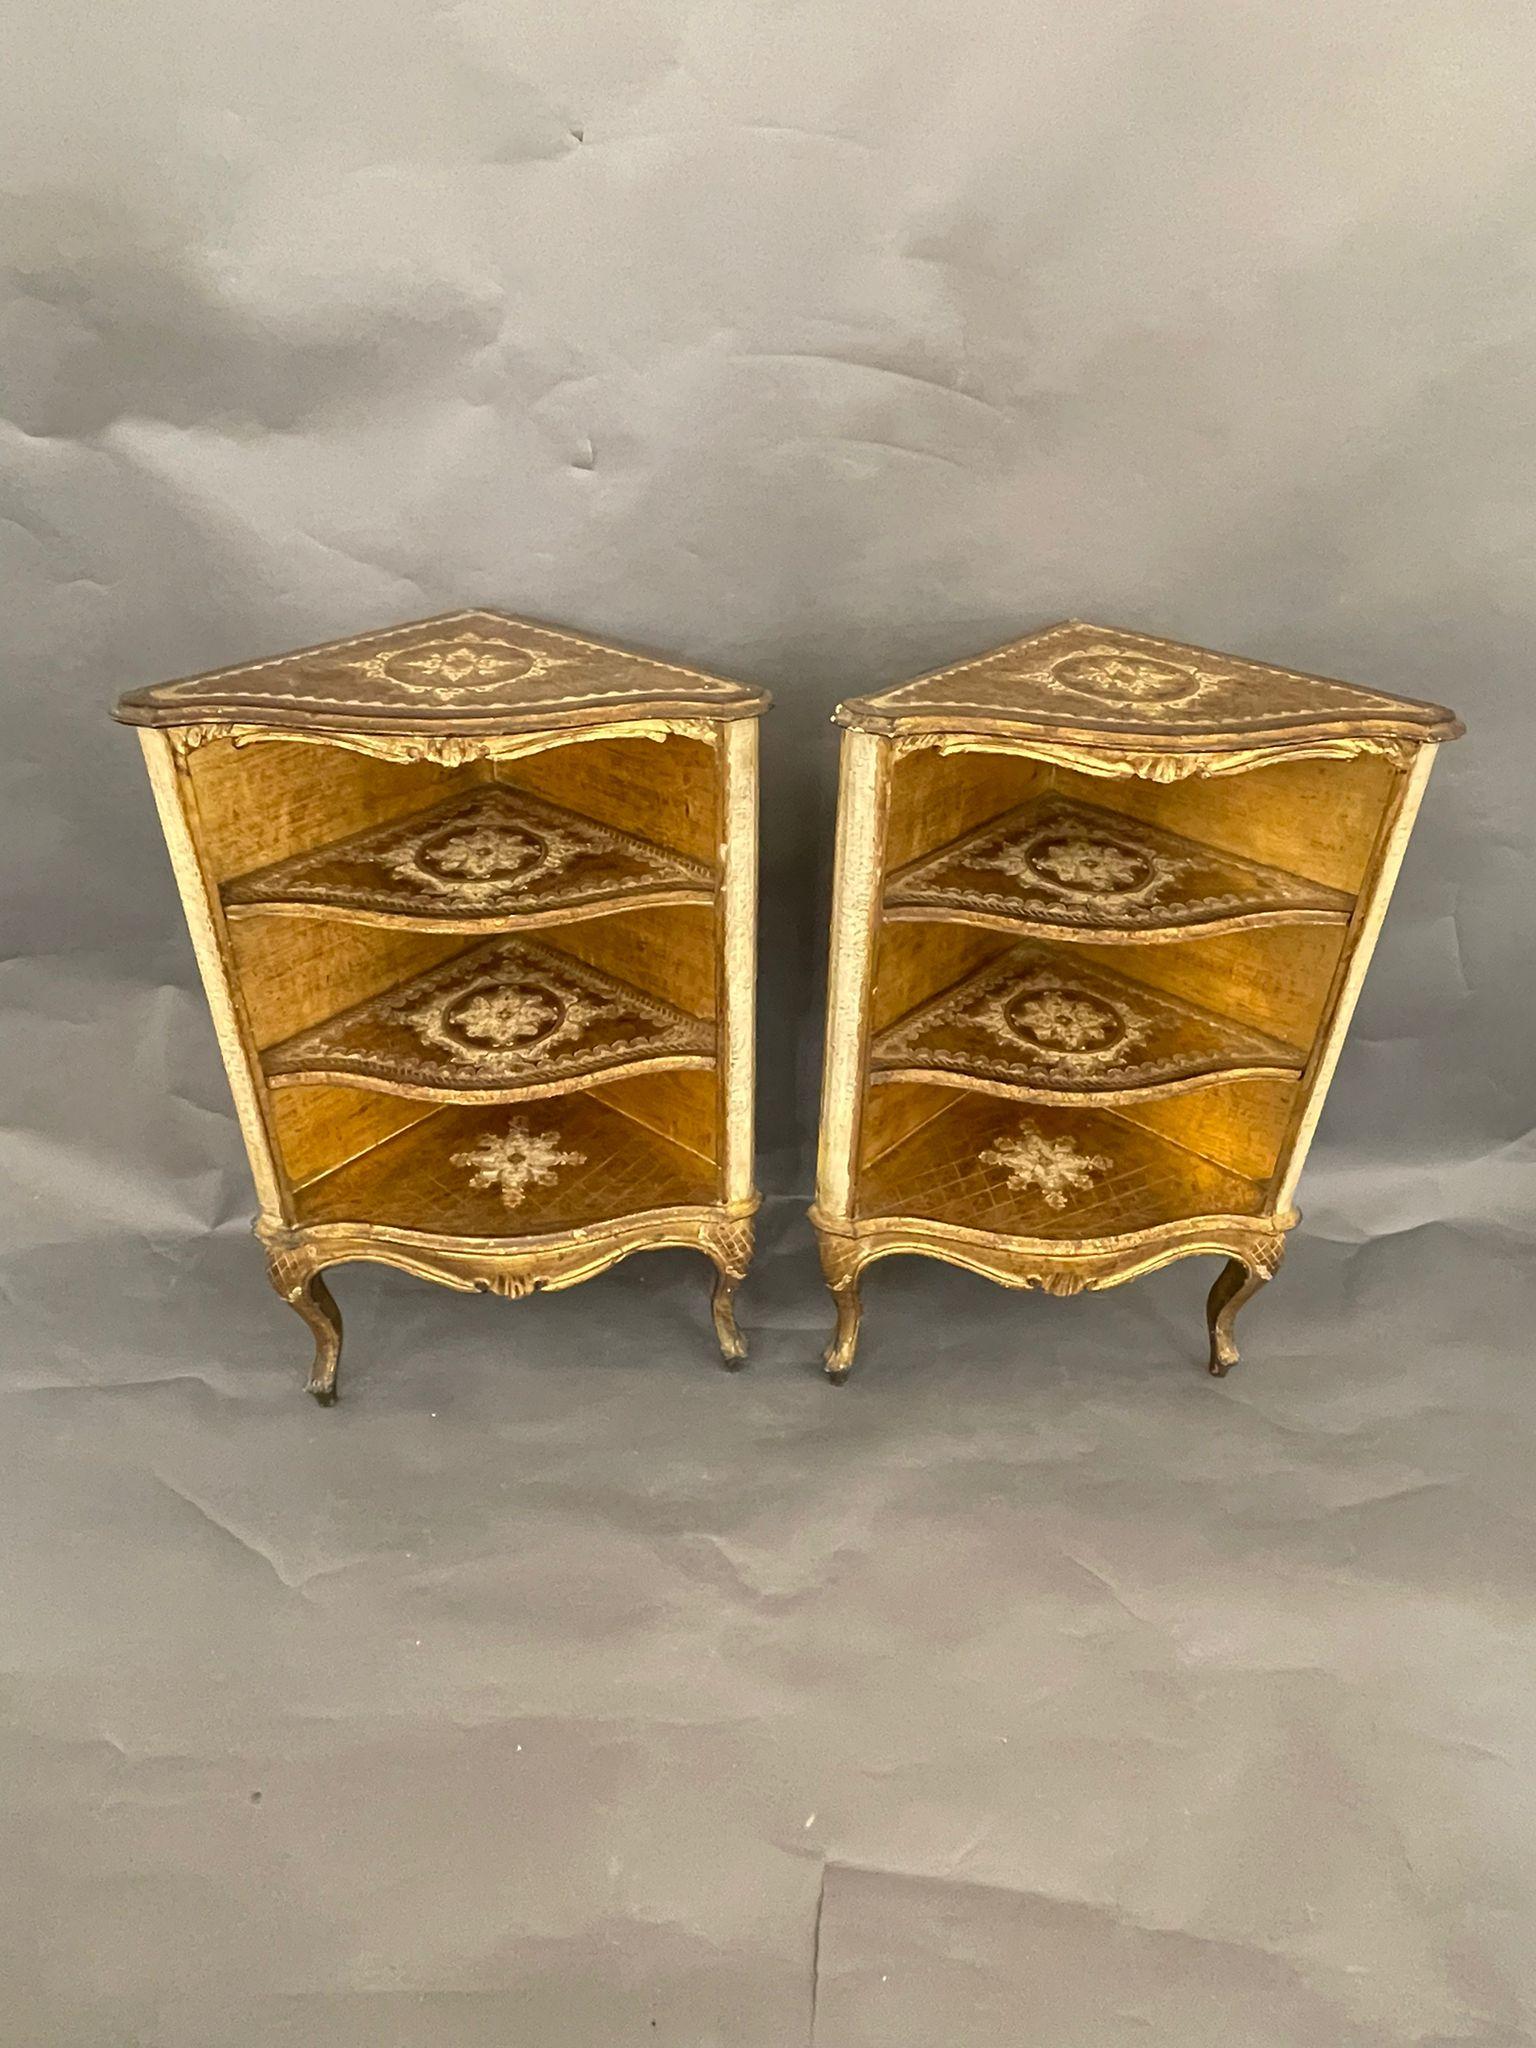 A pair of highly decorative mid-century Italian Florentine corner side table made of gilt wood, in the style of Hollywood Recency, circa 1940s.